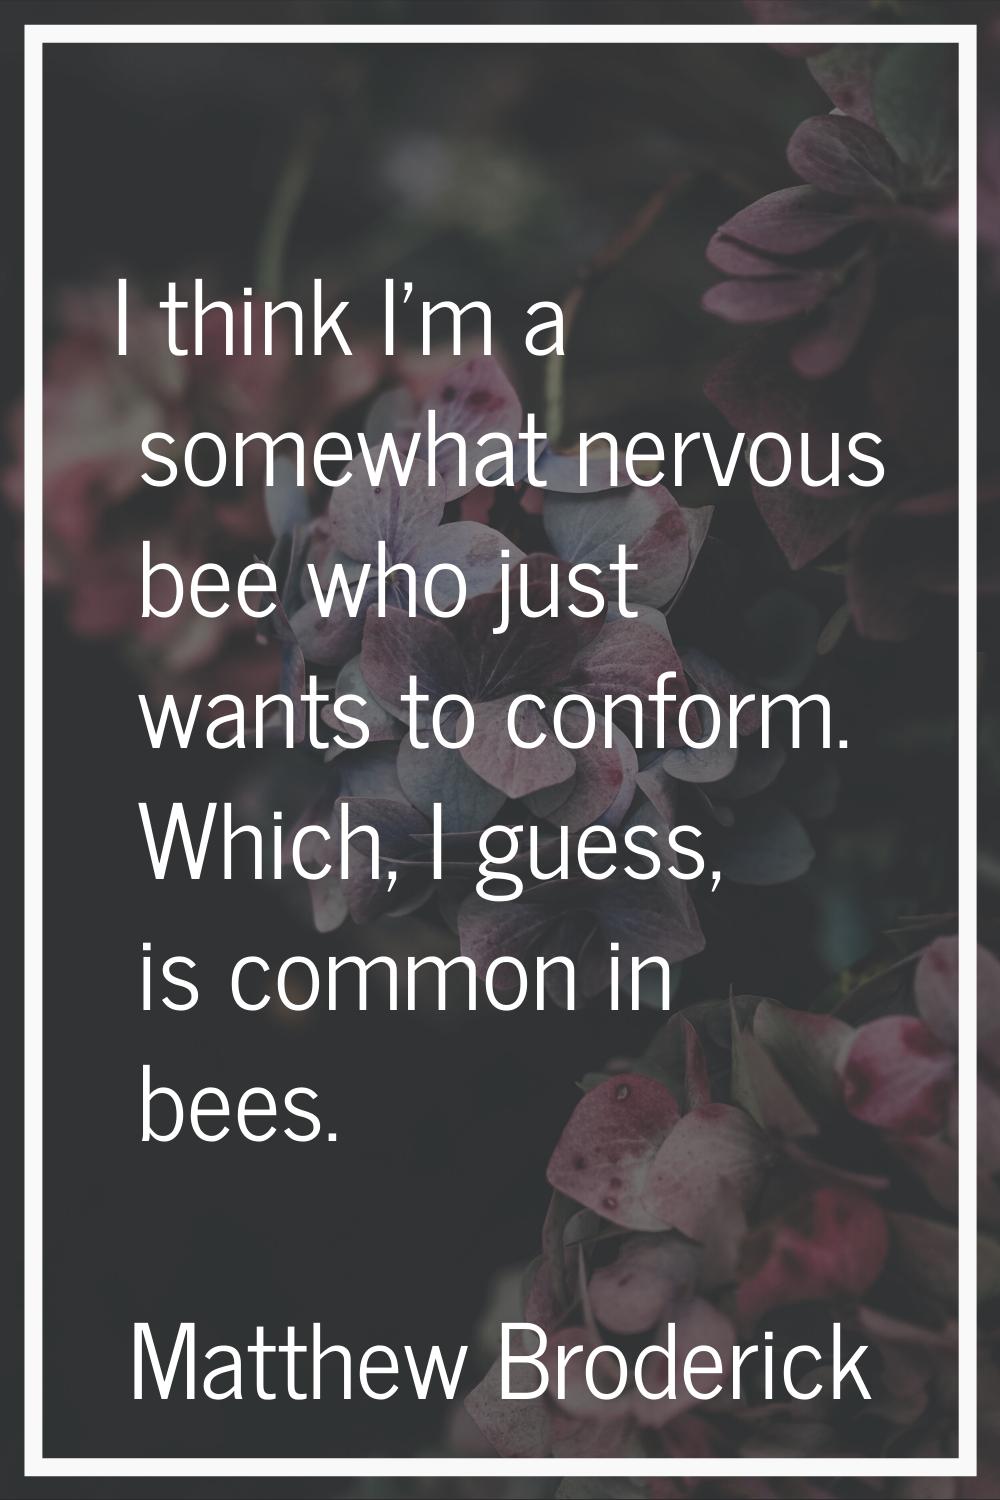 I think I'm a somewhat nervous bee who just wants to conform. Which, I guess, is common in bees.